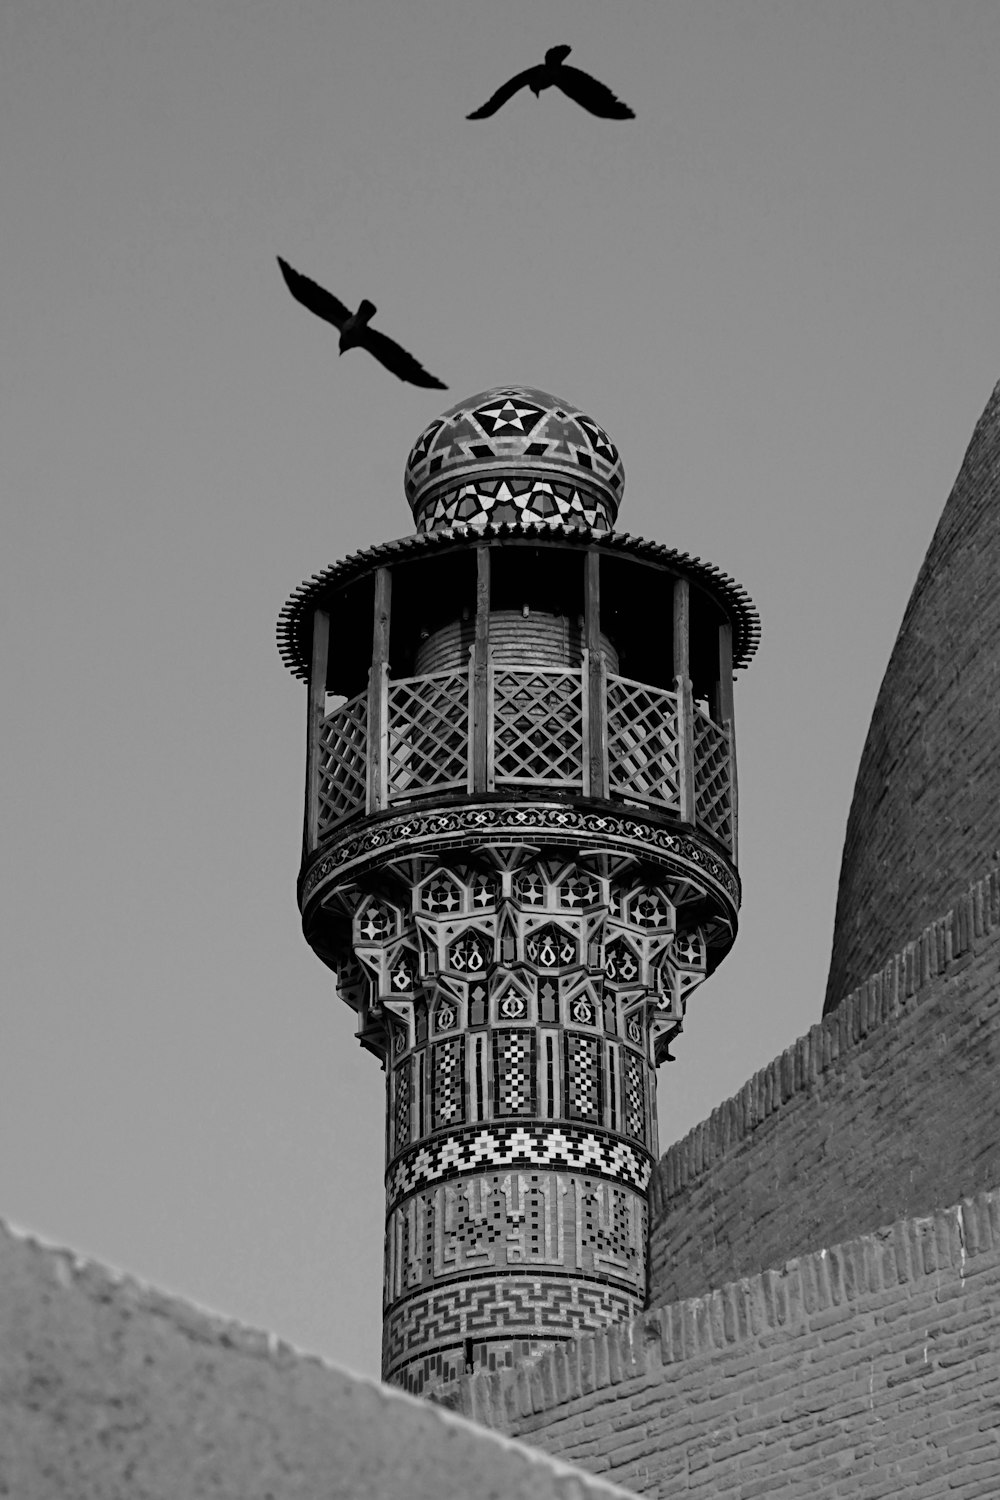 two birds are flying over a tall tower